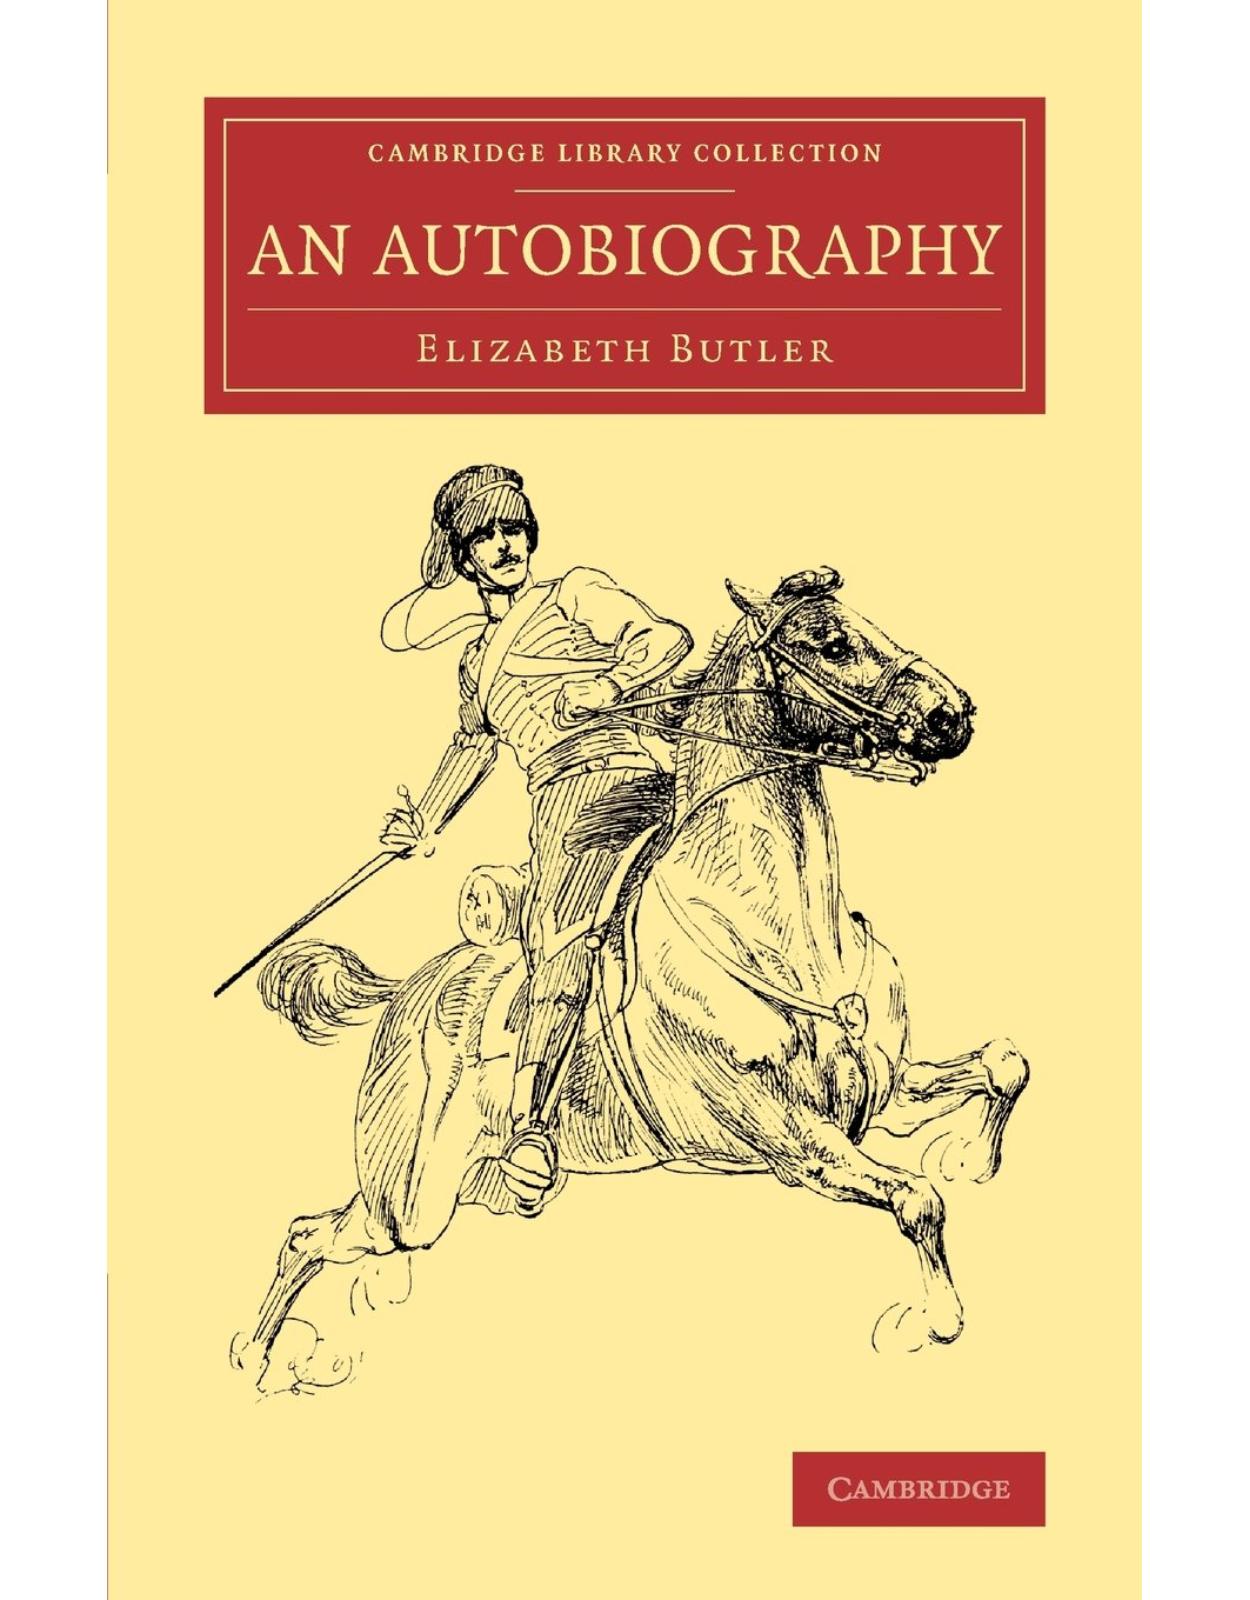 An Autobiography (Cambridge Library Collection - Art and Architecture)